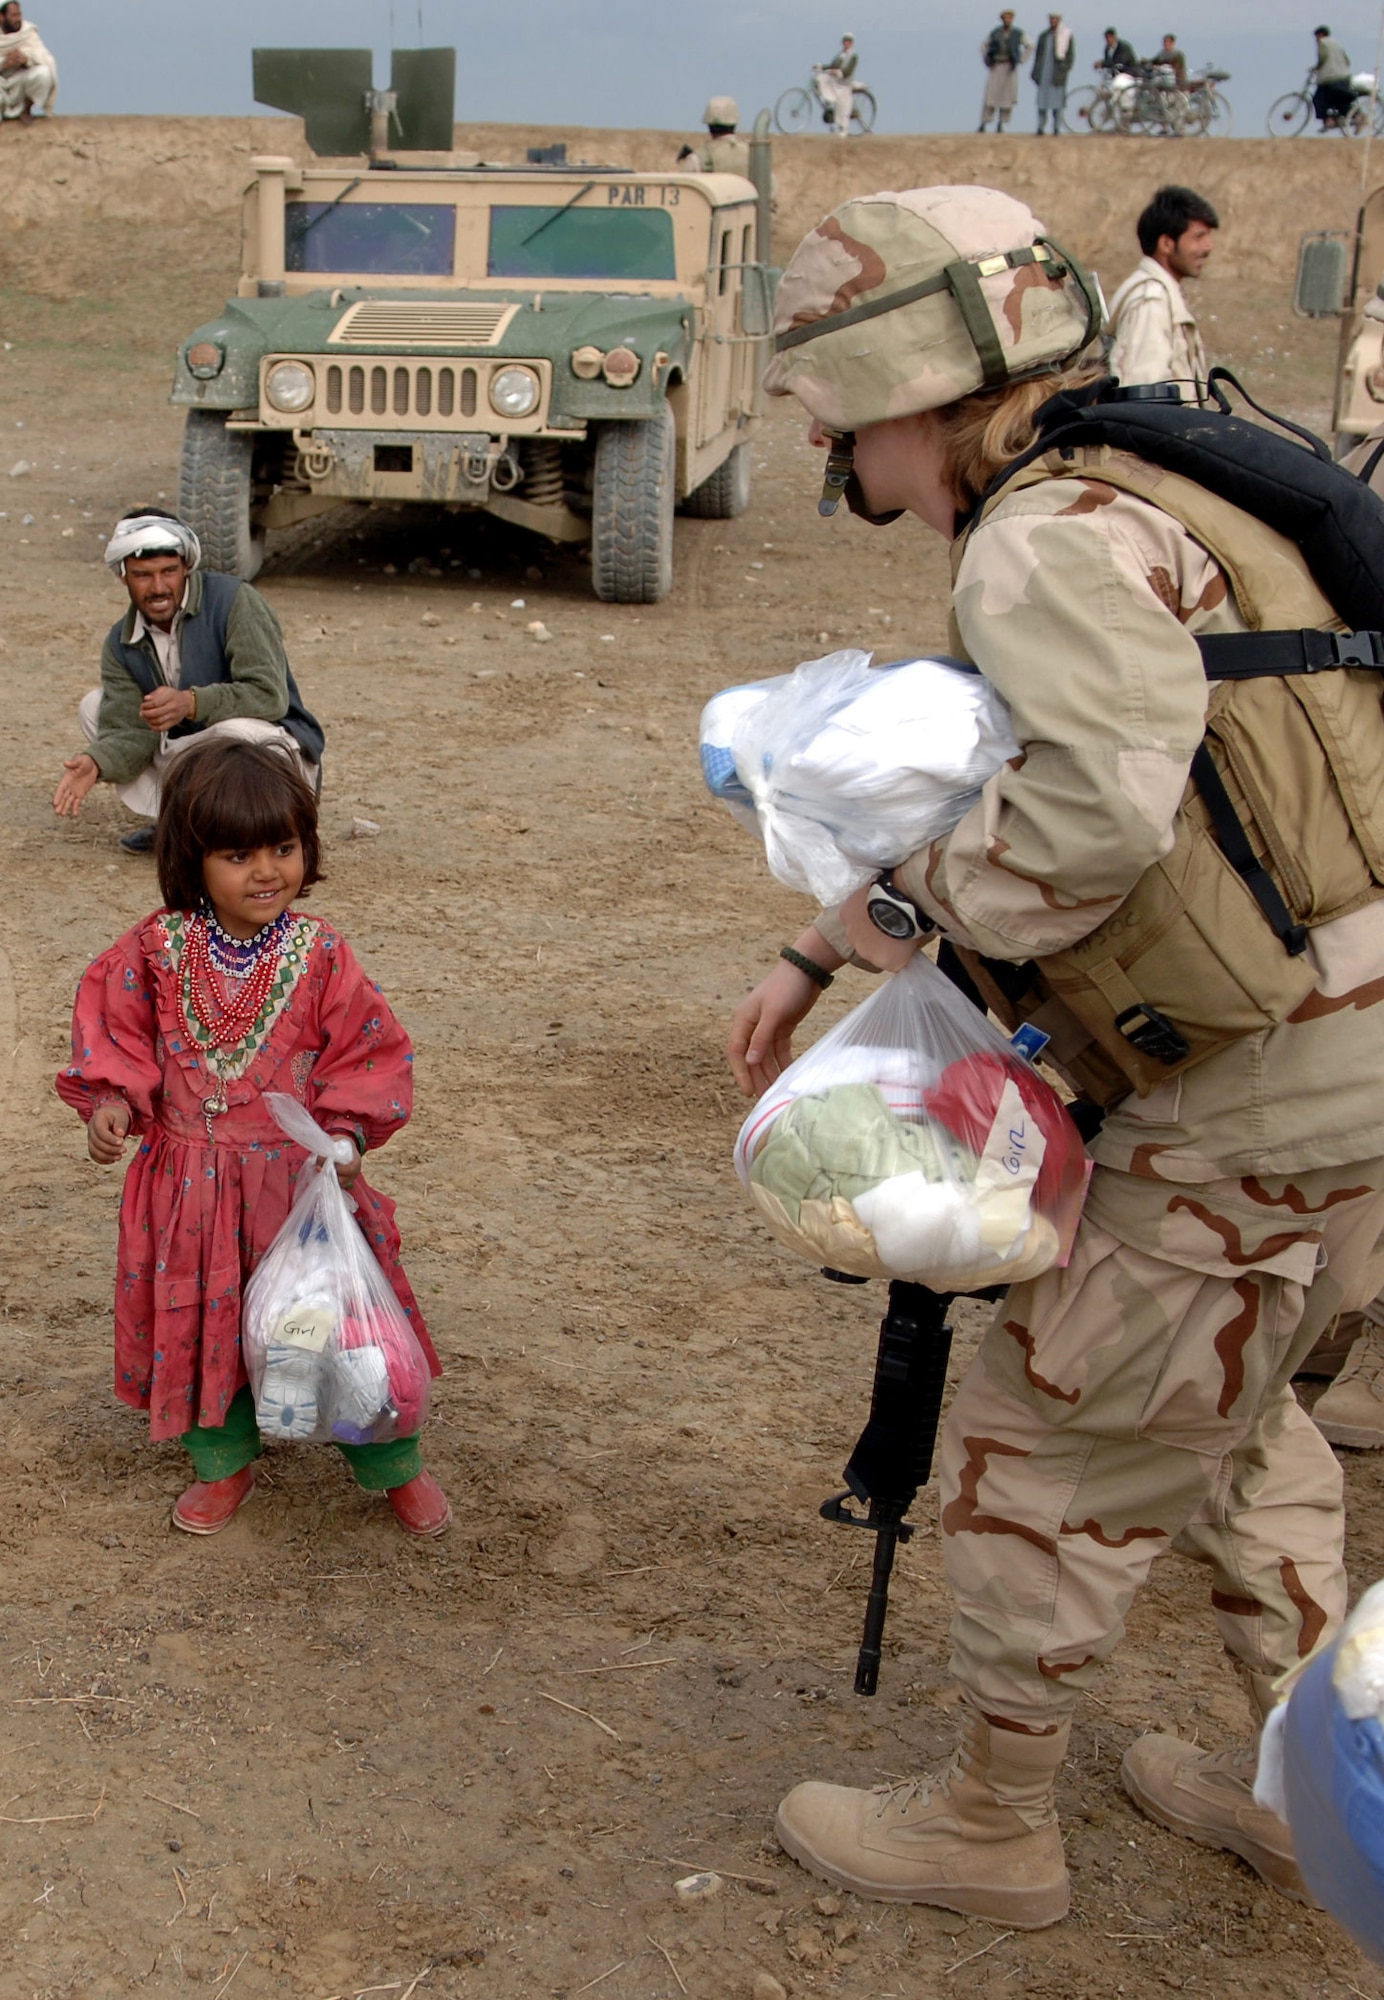 A young girl smiles at 1st Lt. Marcia Frazho after receiving a bag of assorted goods during a recent Adopt-A-Village visit to Gadia in Parwan Province, Afghanistan. Lieutenant Frazho is an intelligence officer assigned to the 455th Expeditionary Special Tactics Squadron at Bagram Air Base, Afghanistan. (U.S. Air Force photo/Staff Sgt. Jennifer Redente) 